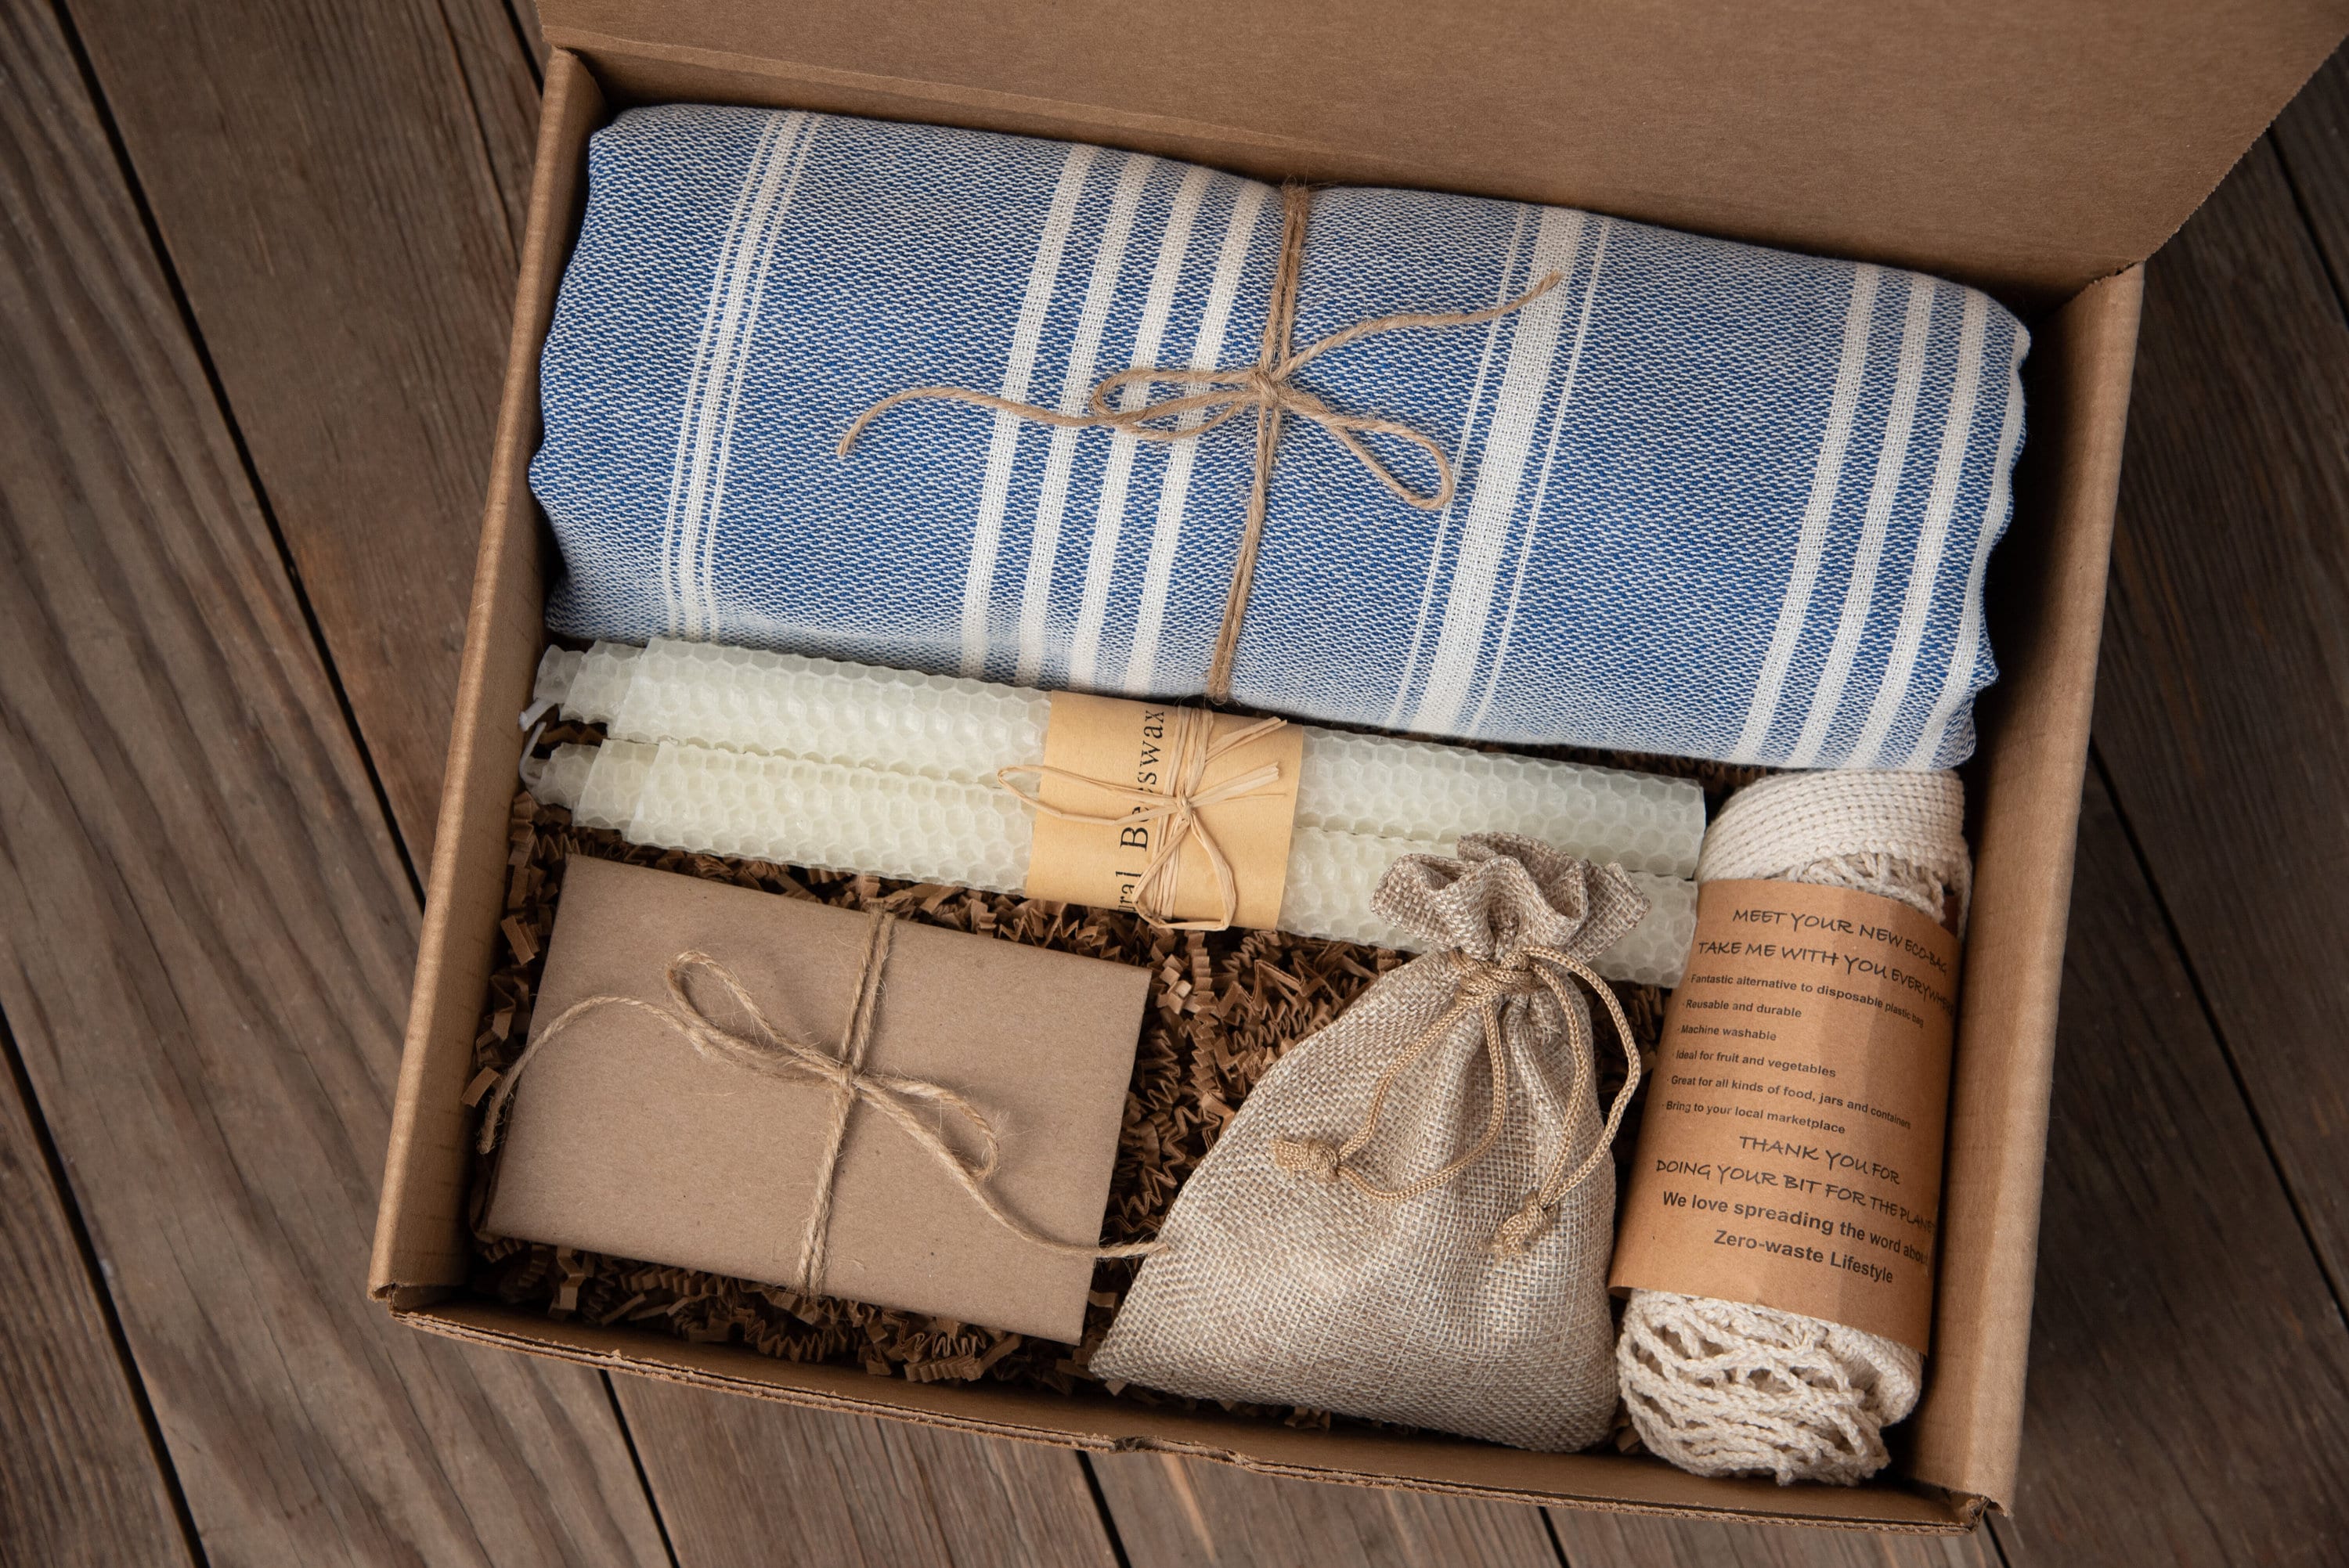 Which is the best website to buy bulk gift packaging? - Quora